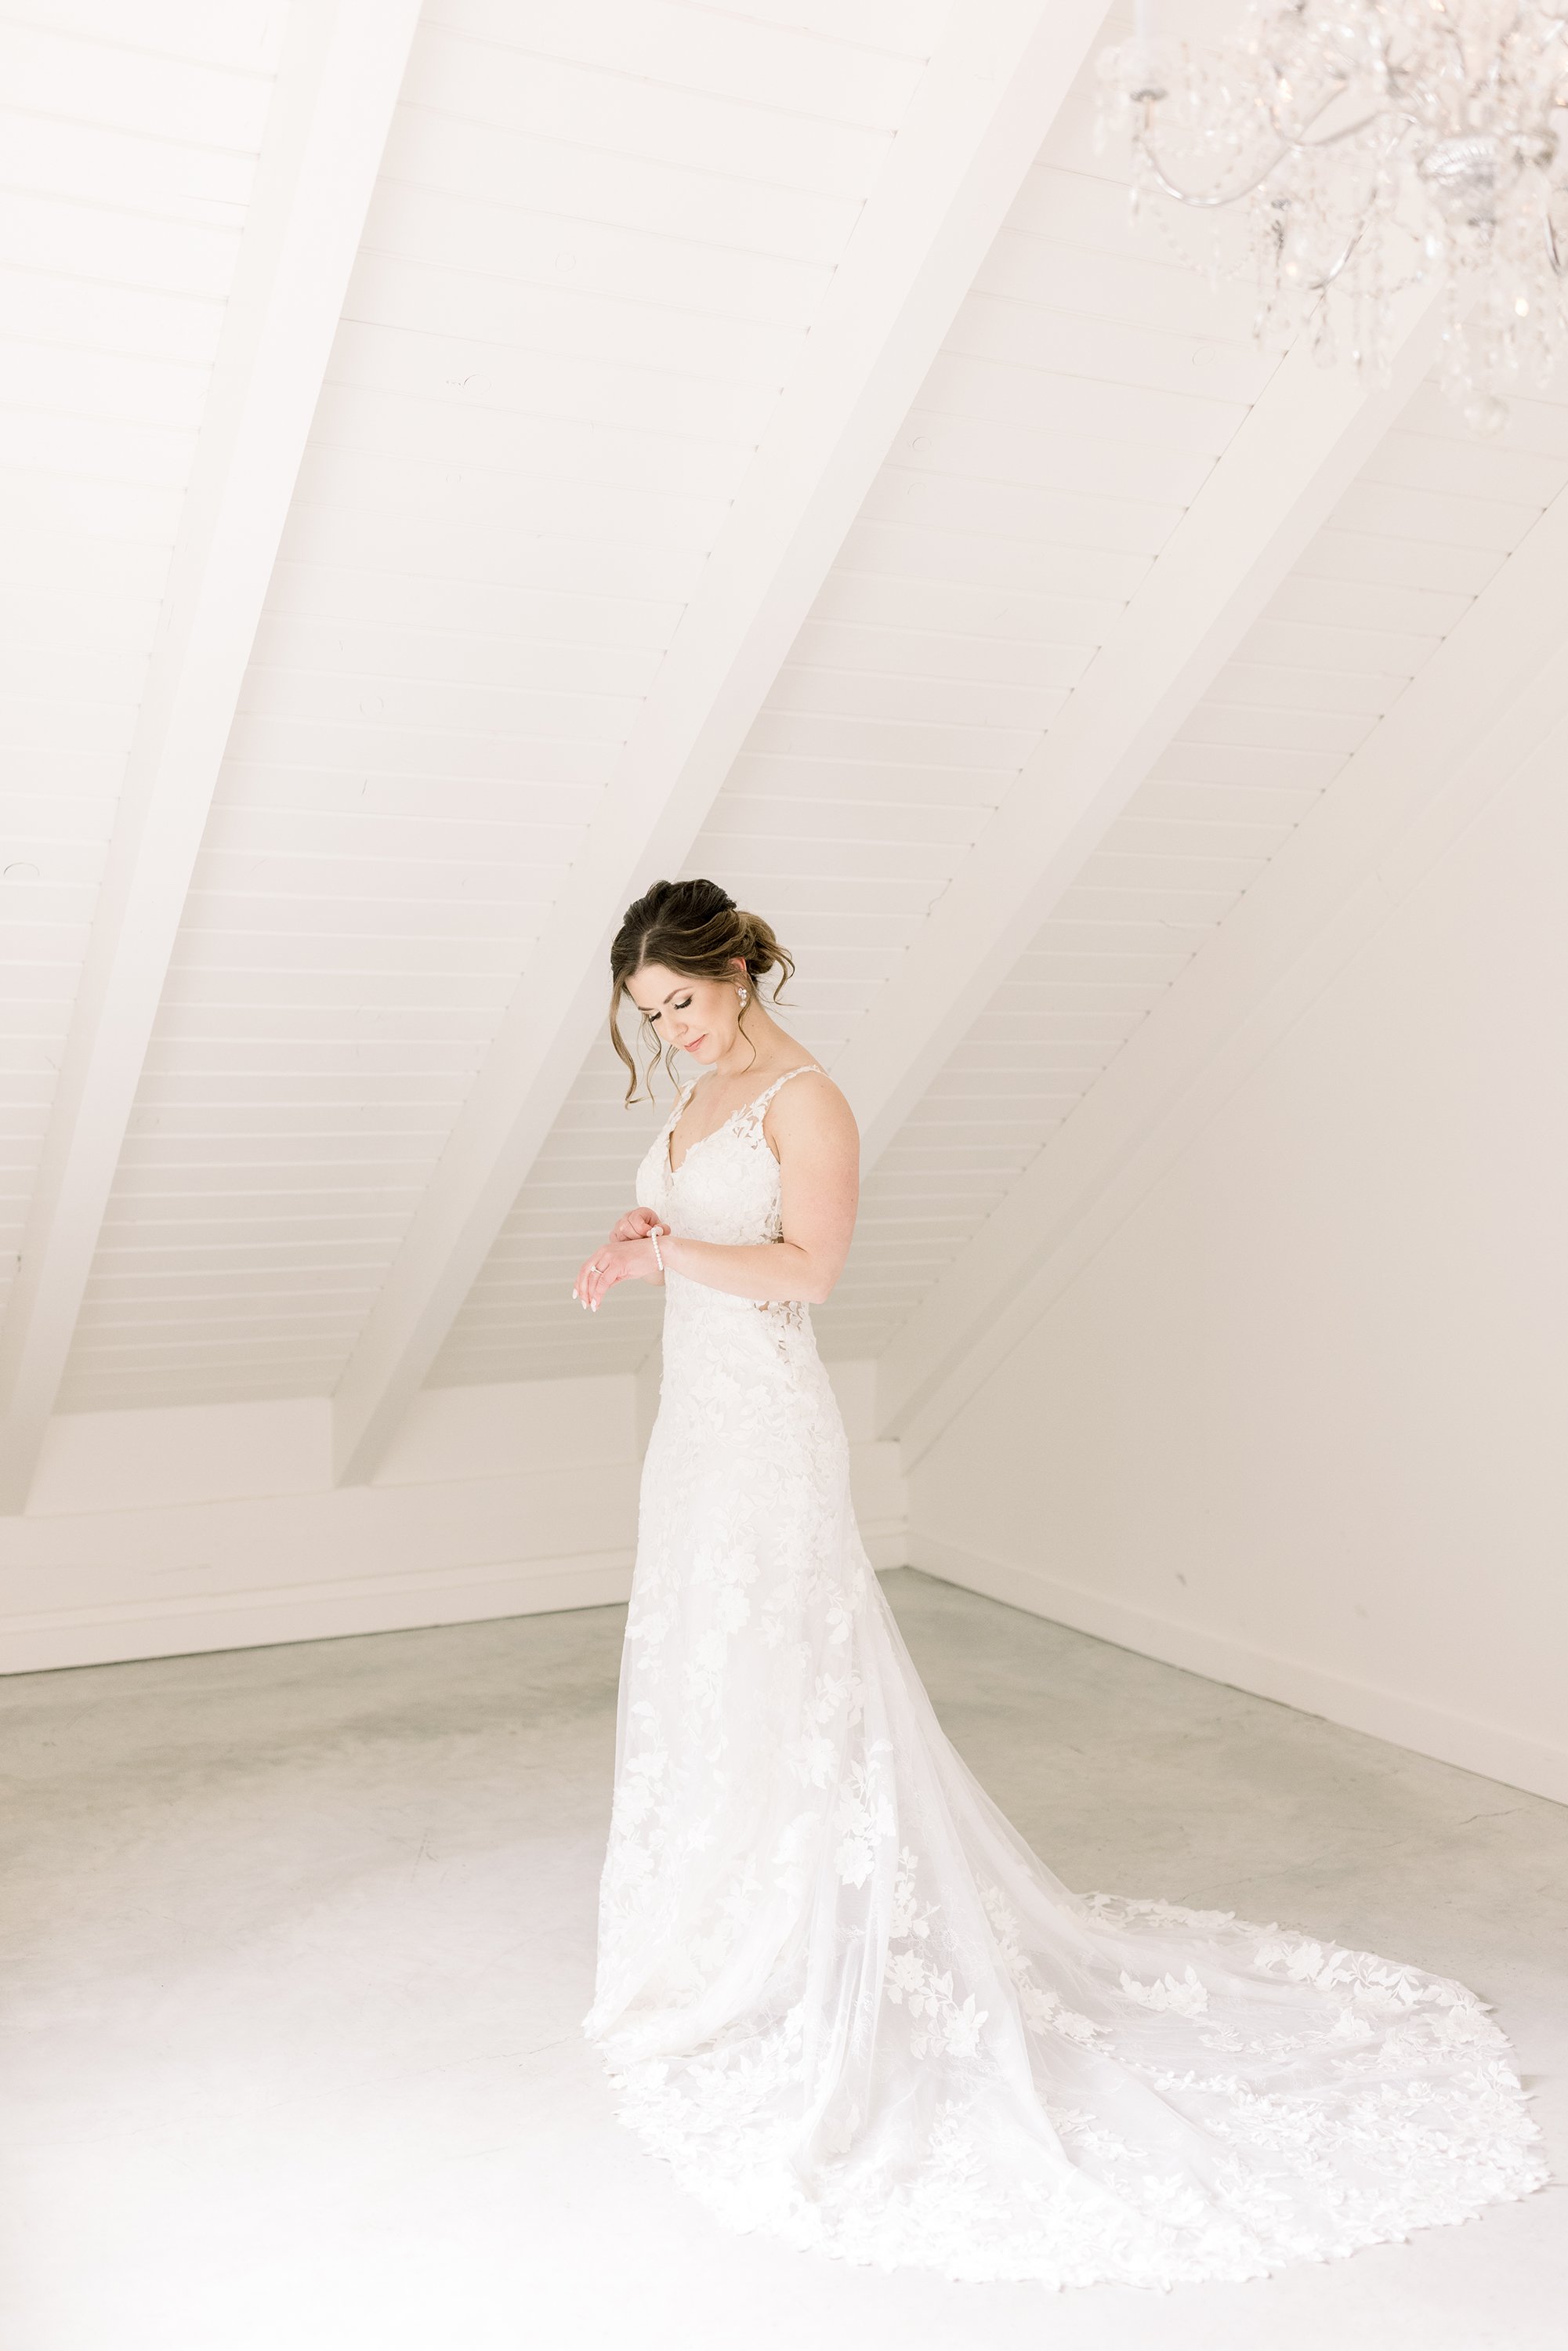  Chelsea Mason Photography captures a portrait of a bride getting ready in a white attic. bride gets ready bridal portrait #ChelseaMasonPhotography #ChelseaMasonWeddings #WakefieldWeddings #LeBelvedere #Wakefieldweddingphotographers 